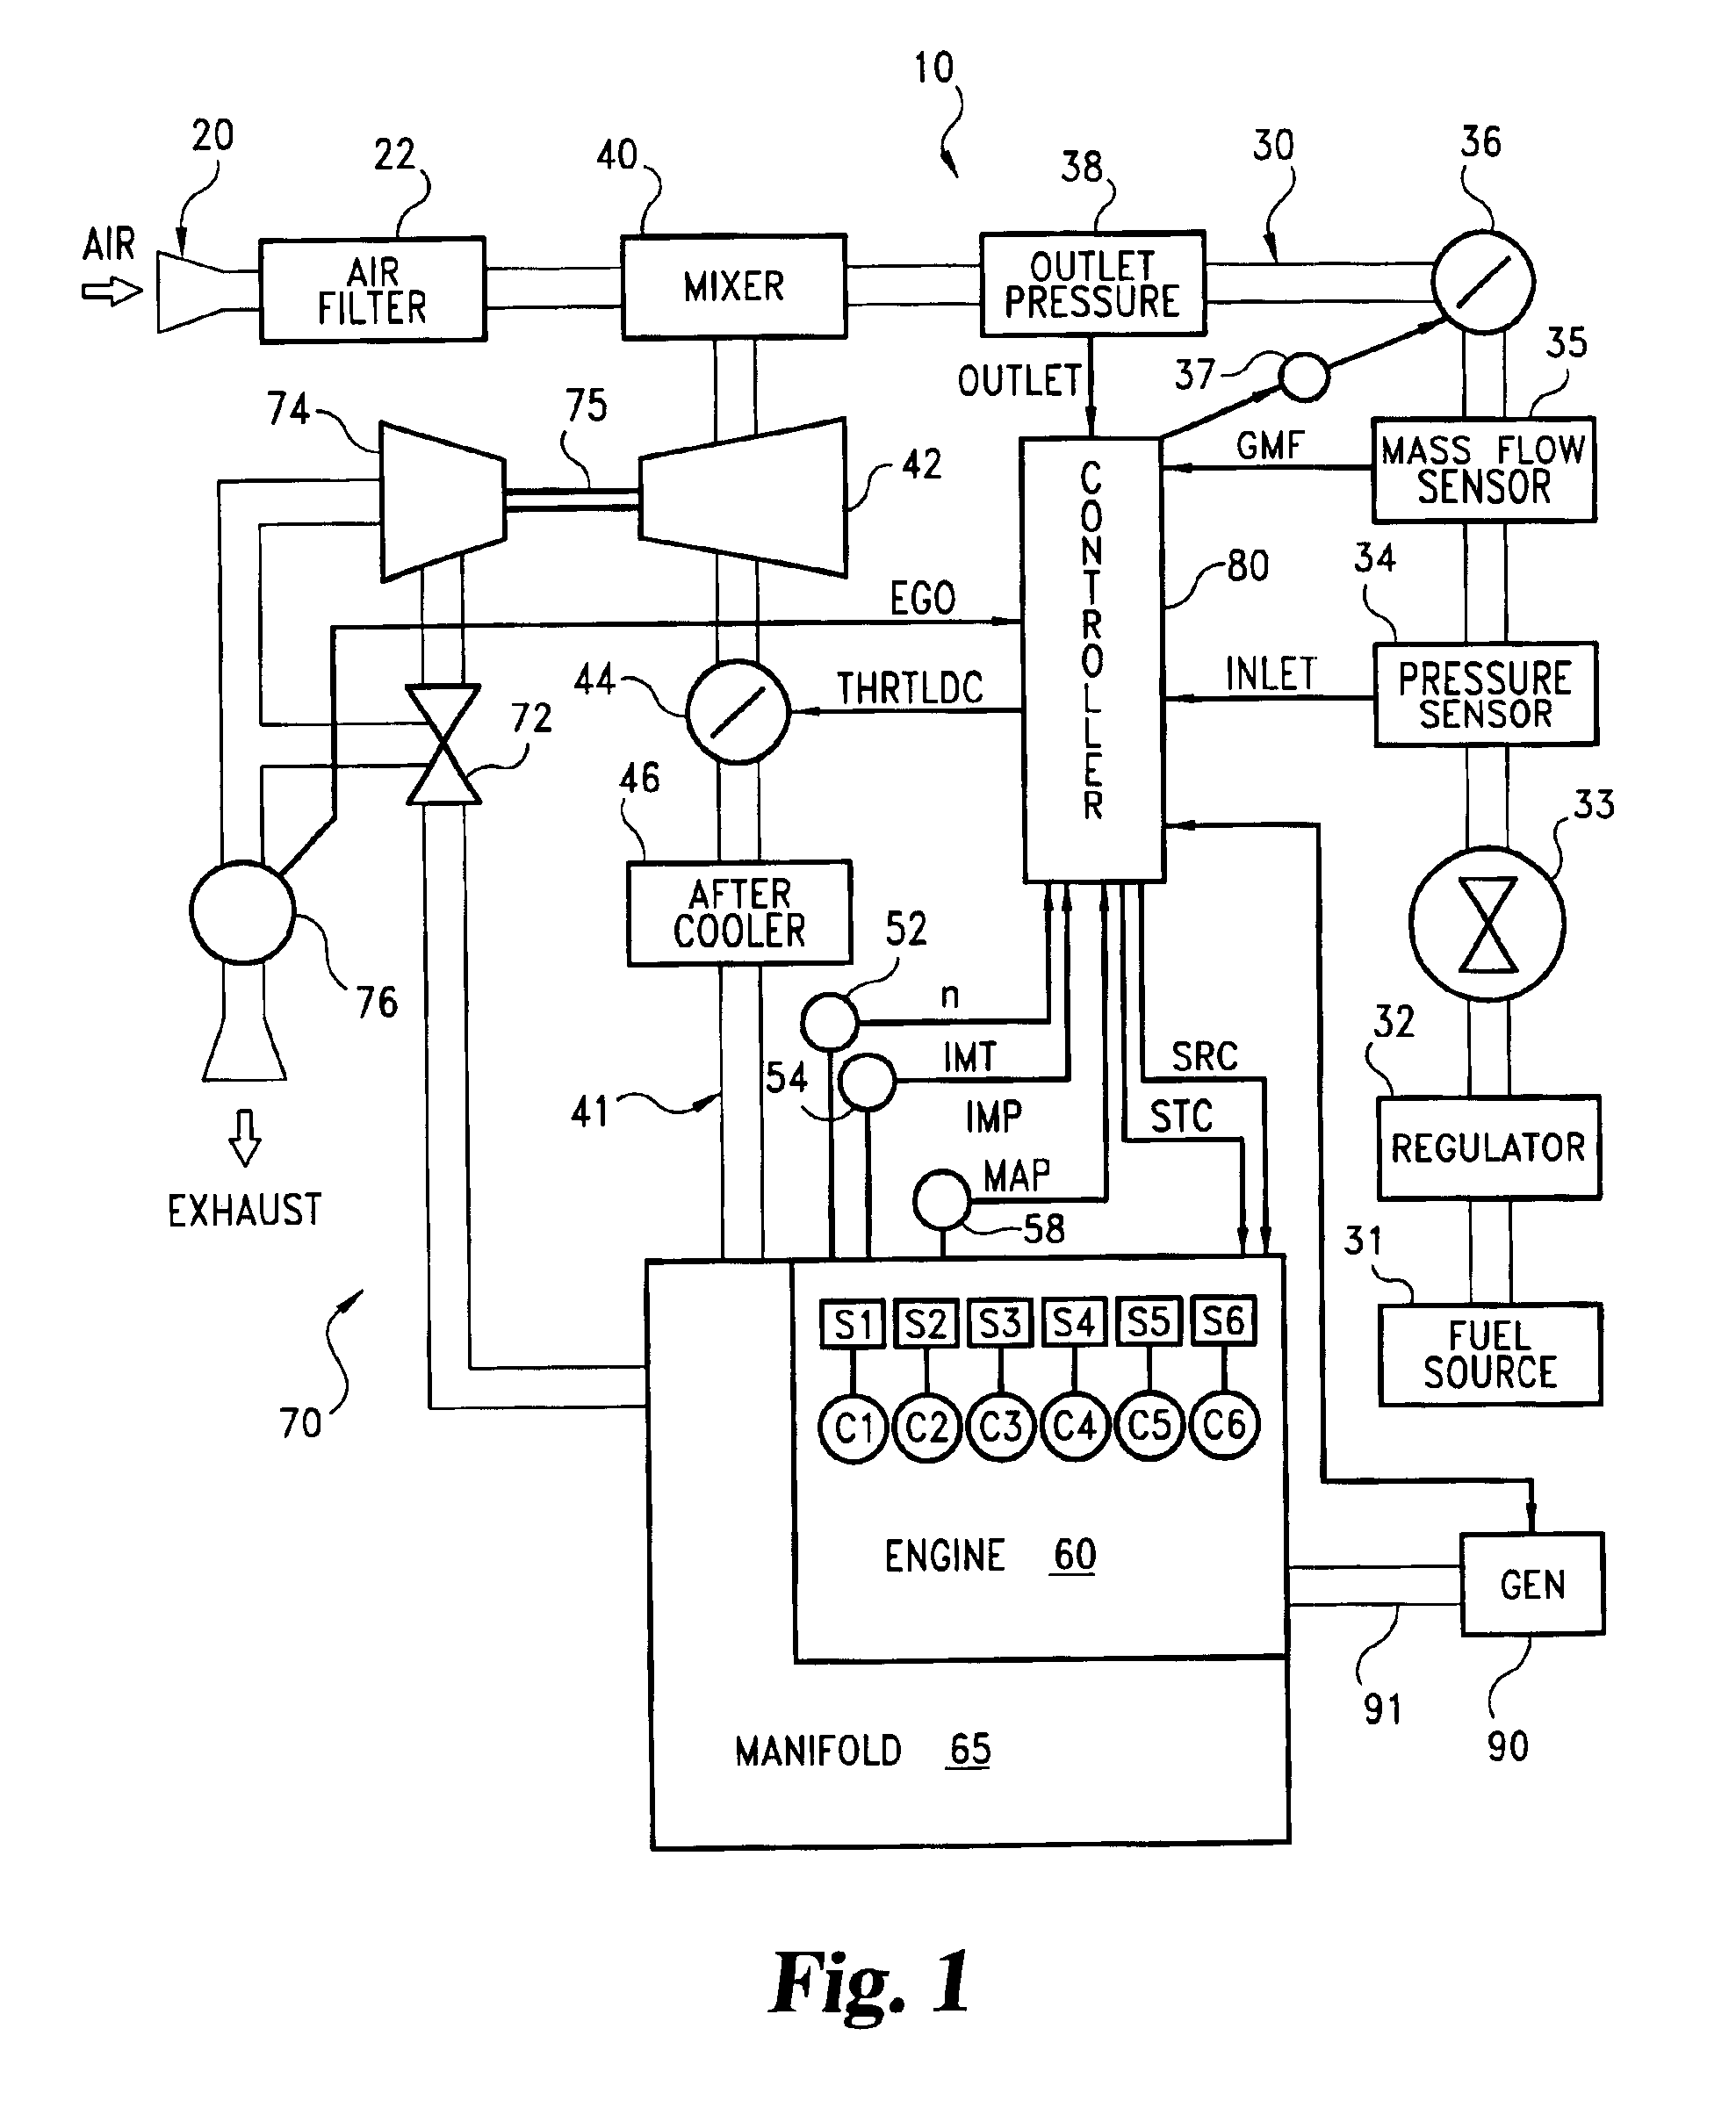 System for regulating speed of an internal combustion engine